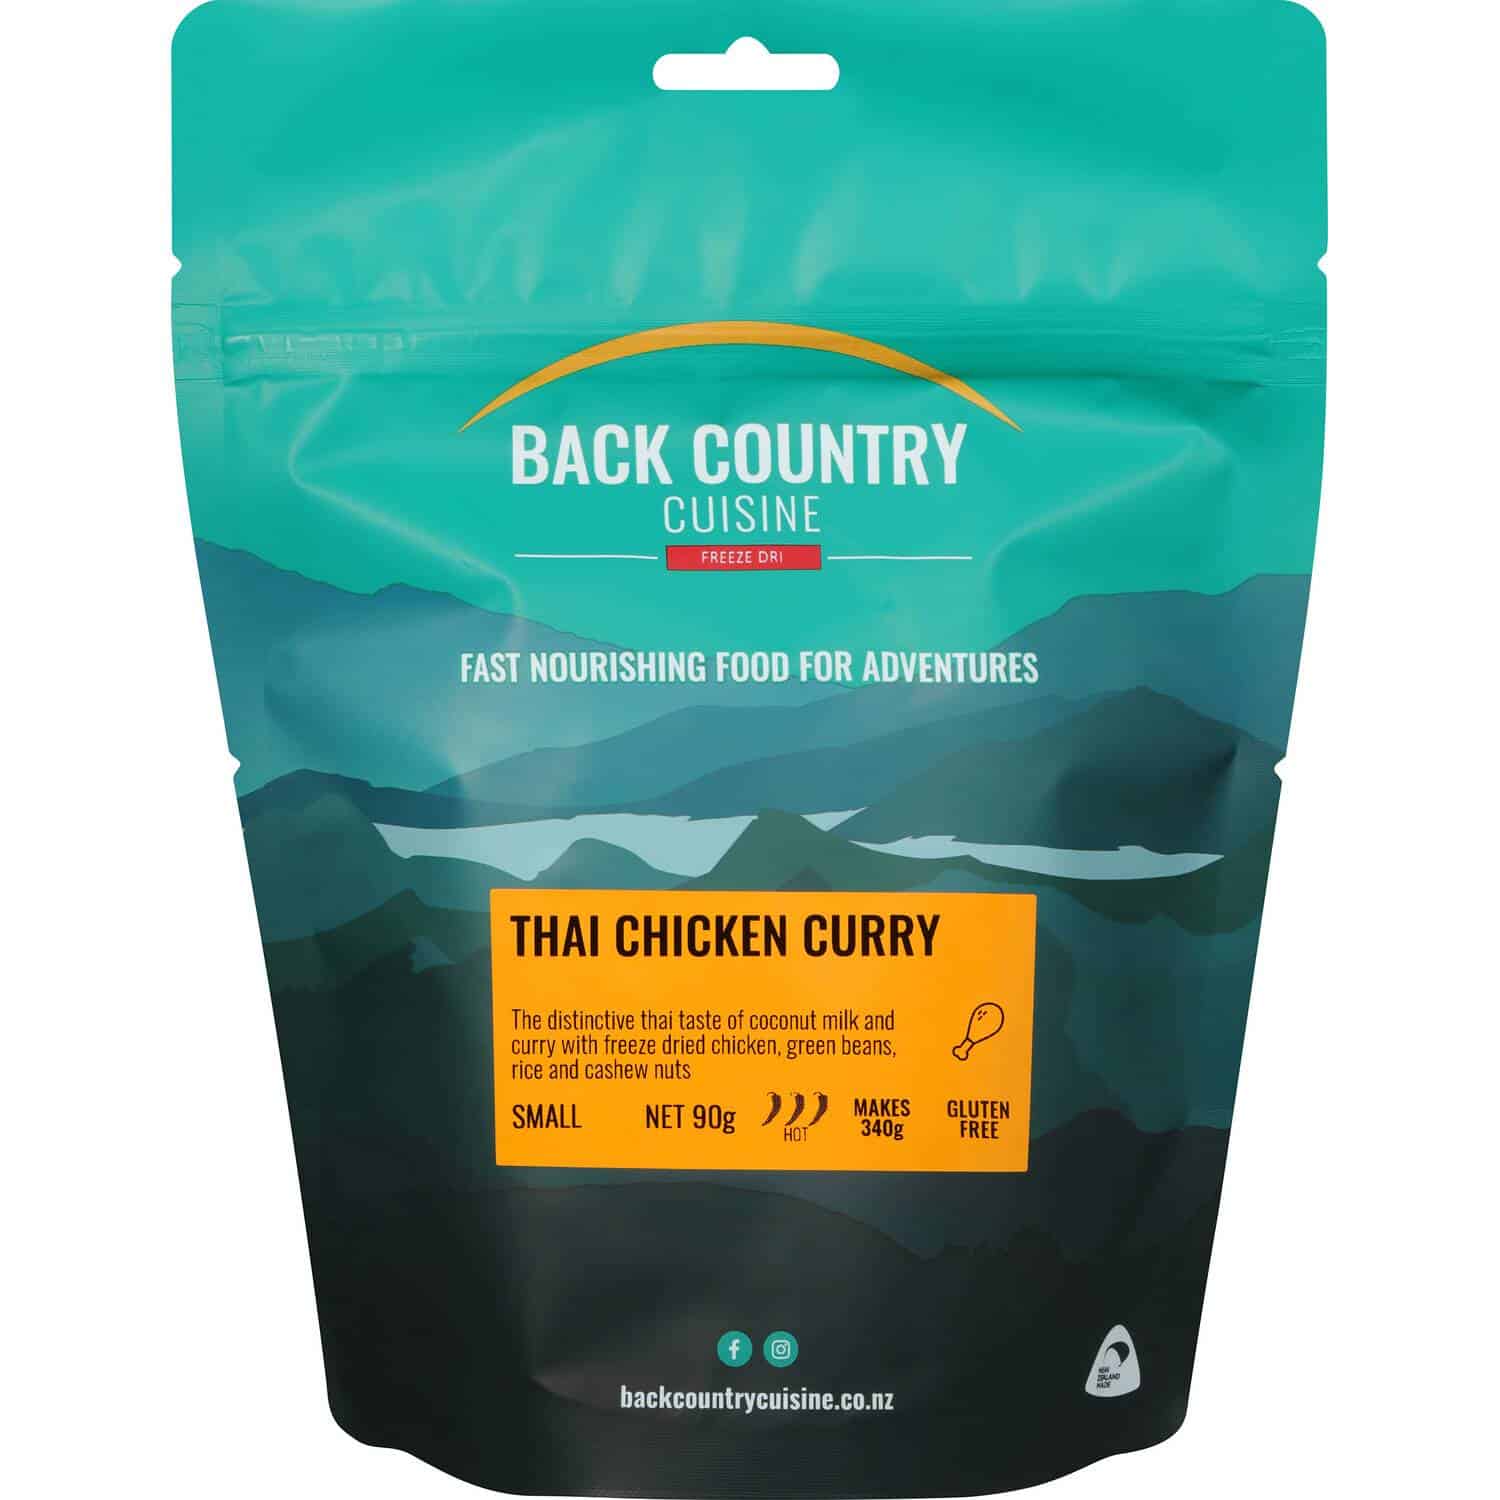 Back Country Cuisine Thai Chicken Curry Regular - Tramping Food and Accessories sold by Venture Outdoors NZ